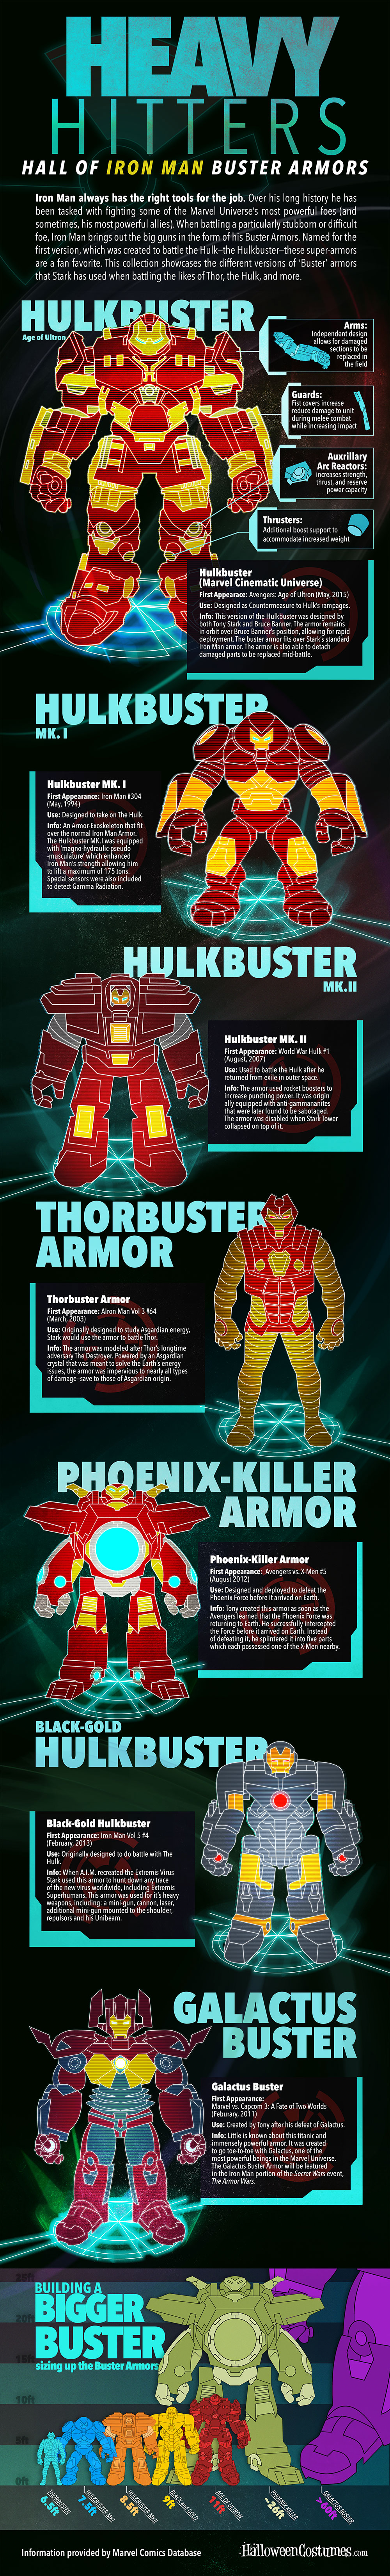 Avengers Age of Ultron Hulkbuster Infographic